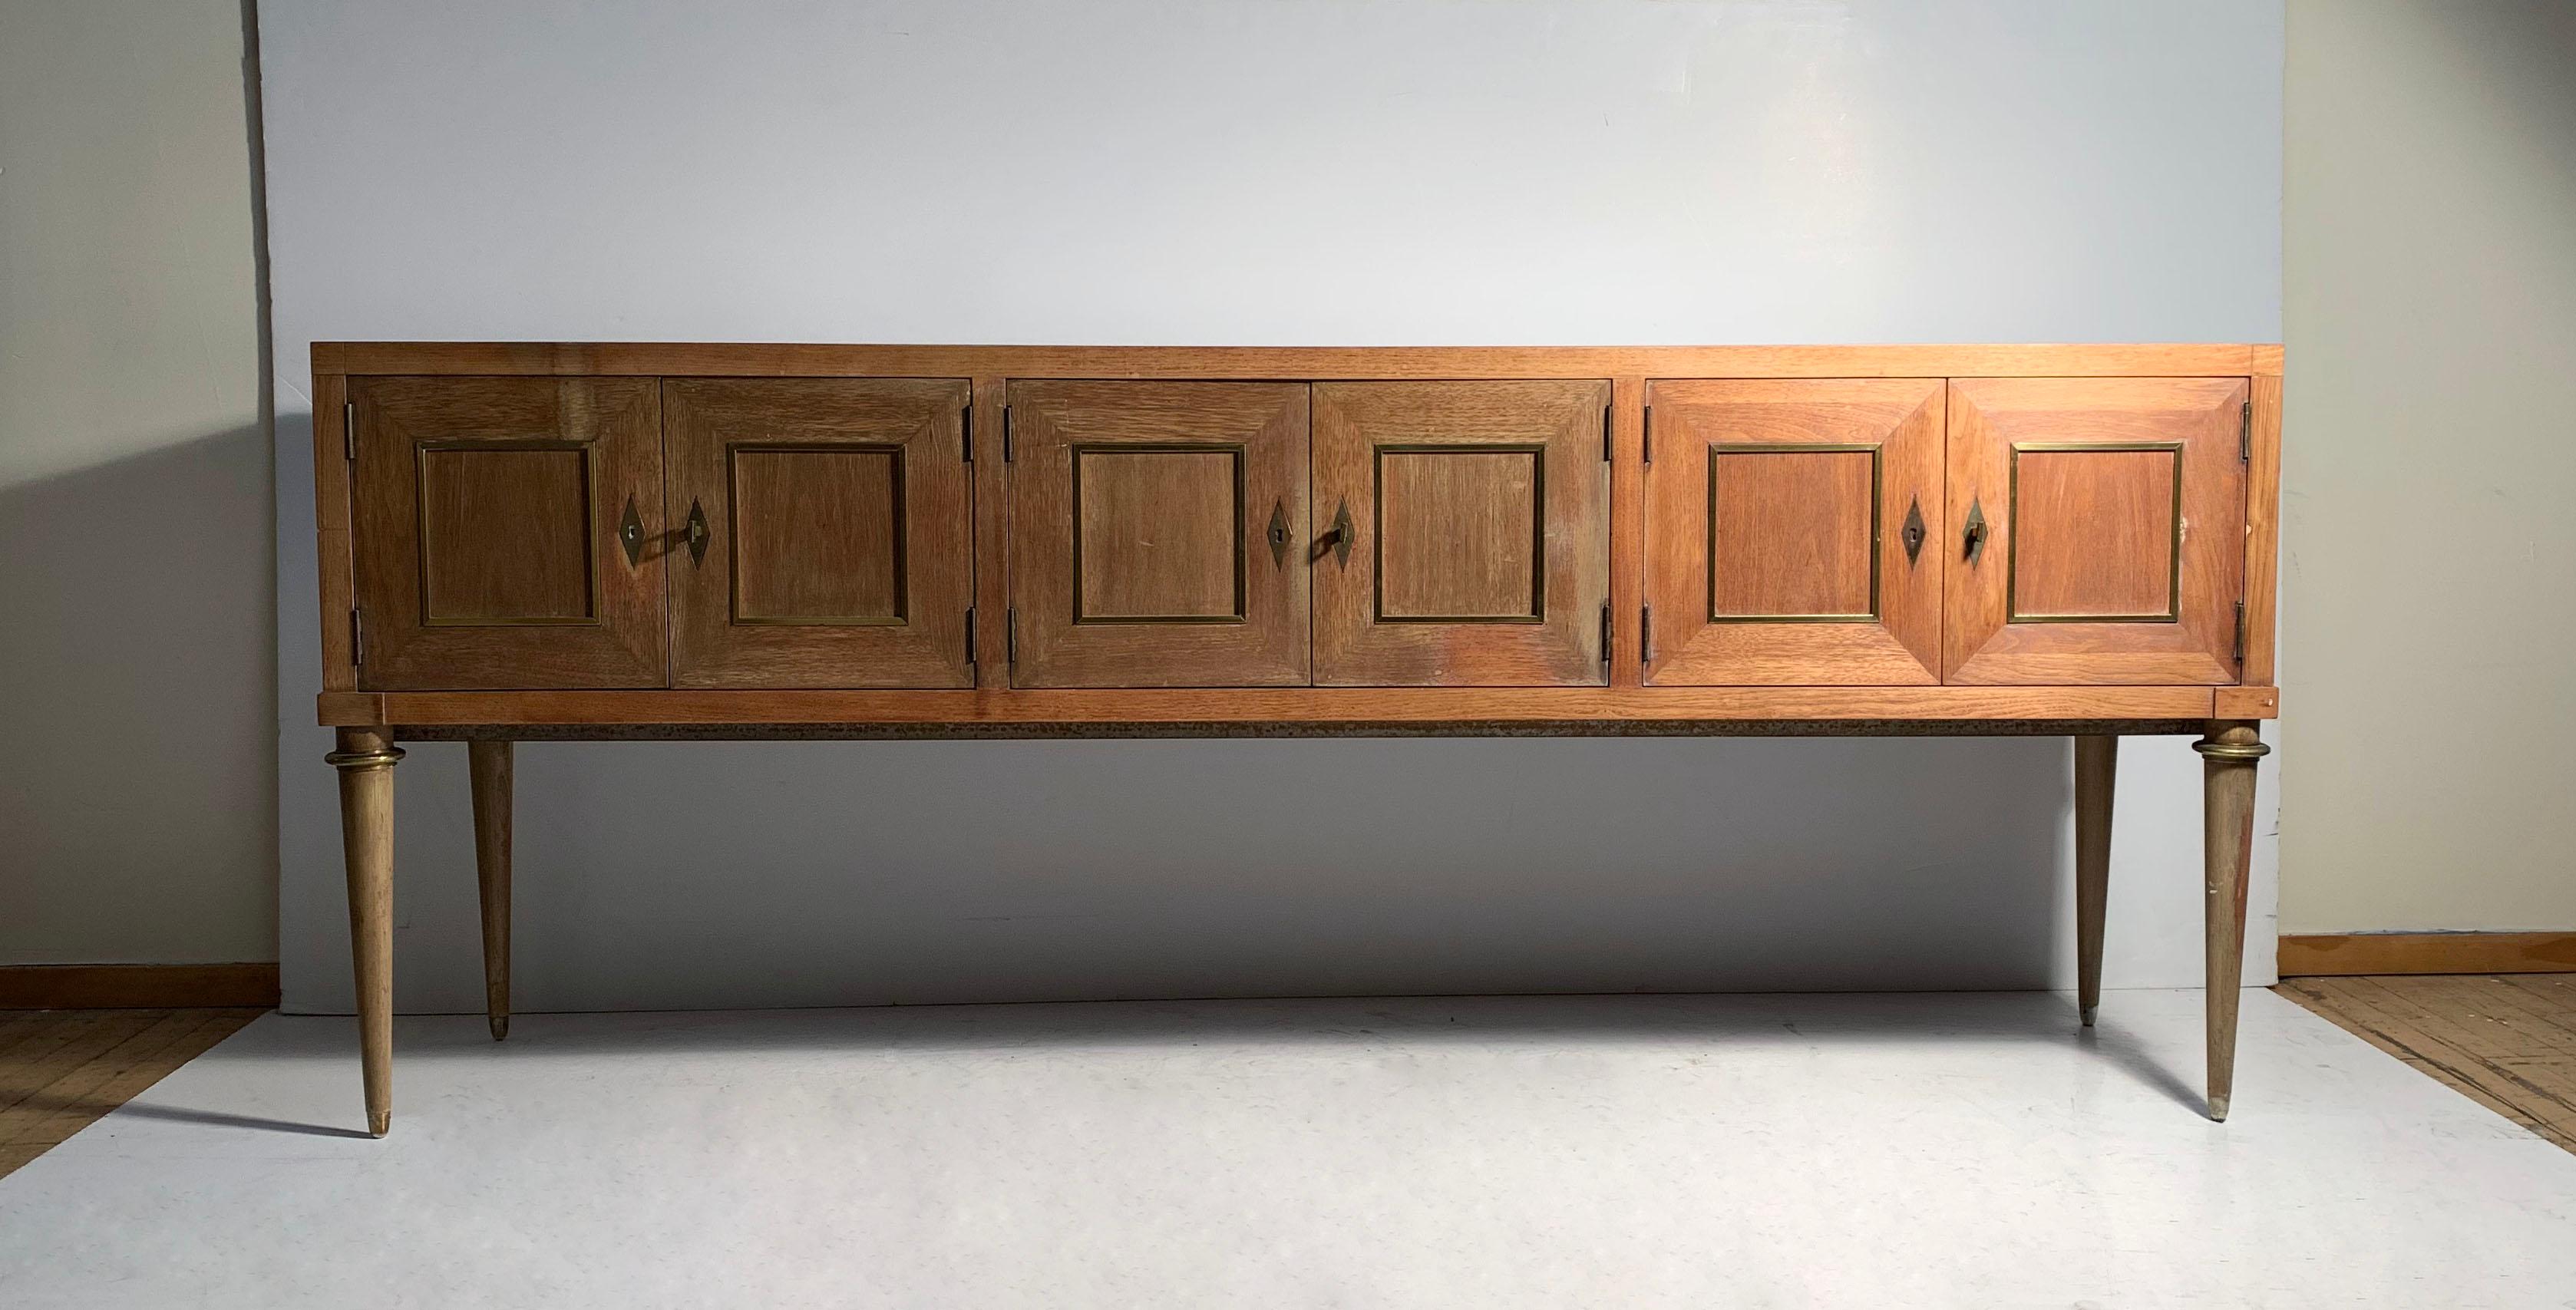 An unusual and desirable sized cabinet credenza console by Bernhard Rohne for Mastercraft in the French Directoire Hollywood regency Deco style.  In the manner of Wormley for Dunbar & Tommi Parzinger.

The finish is weathered and may possibly be ok